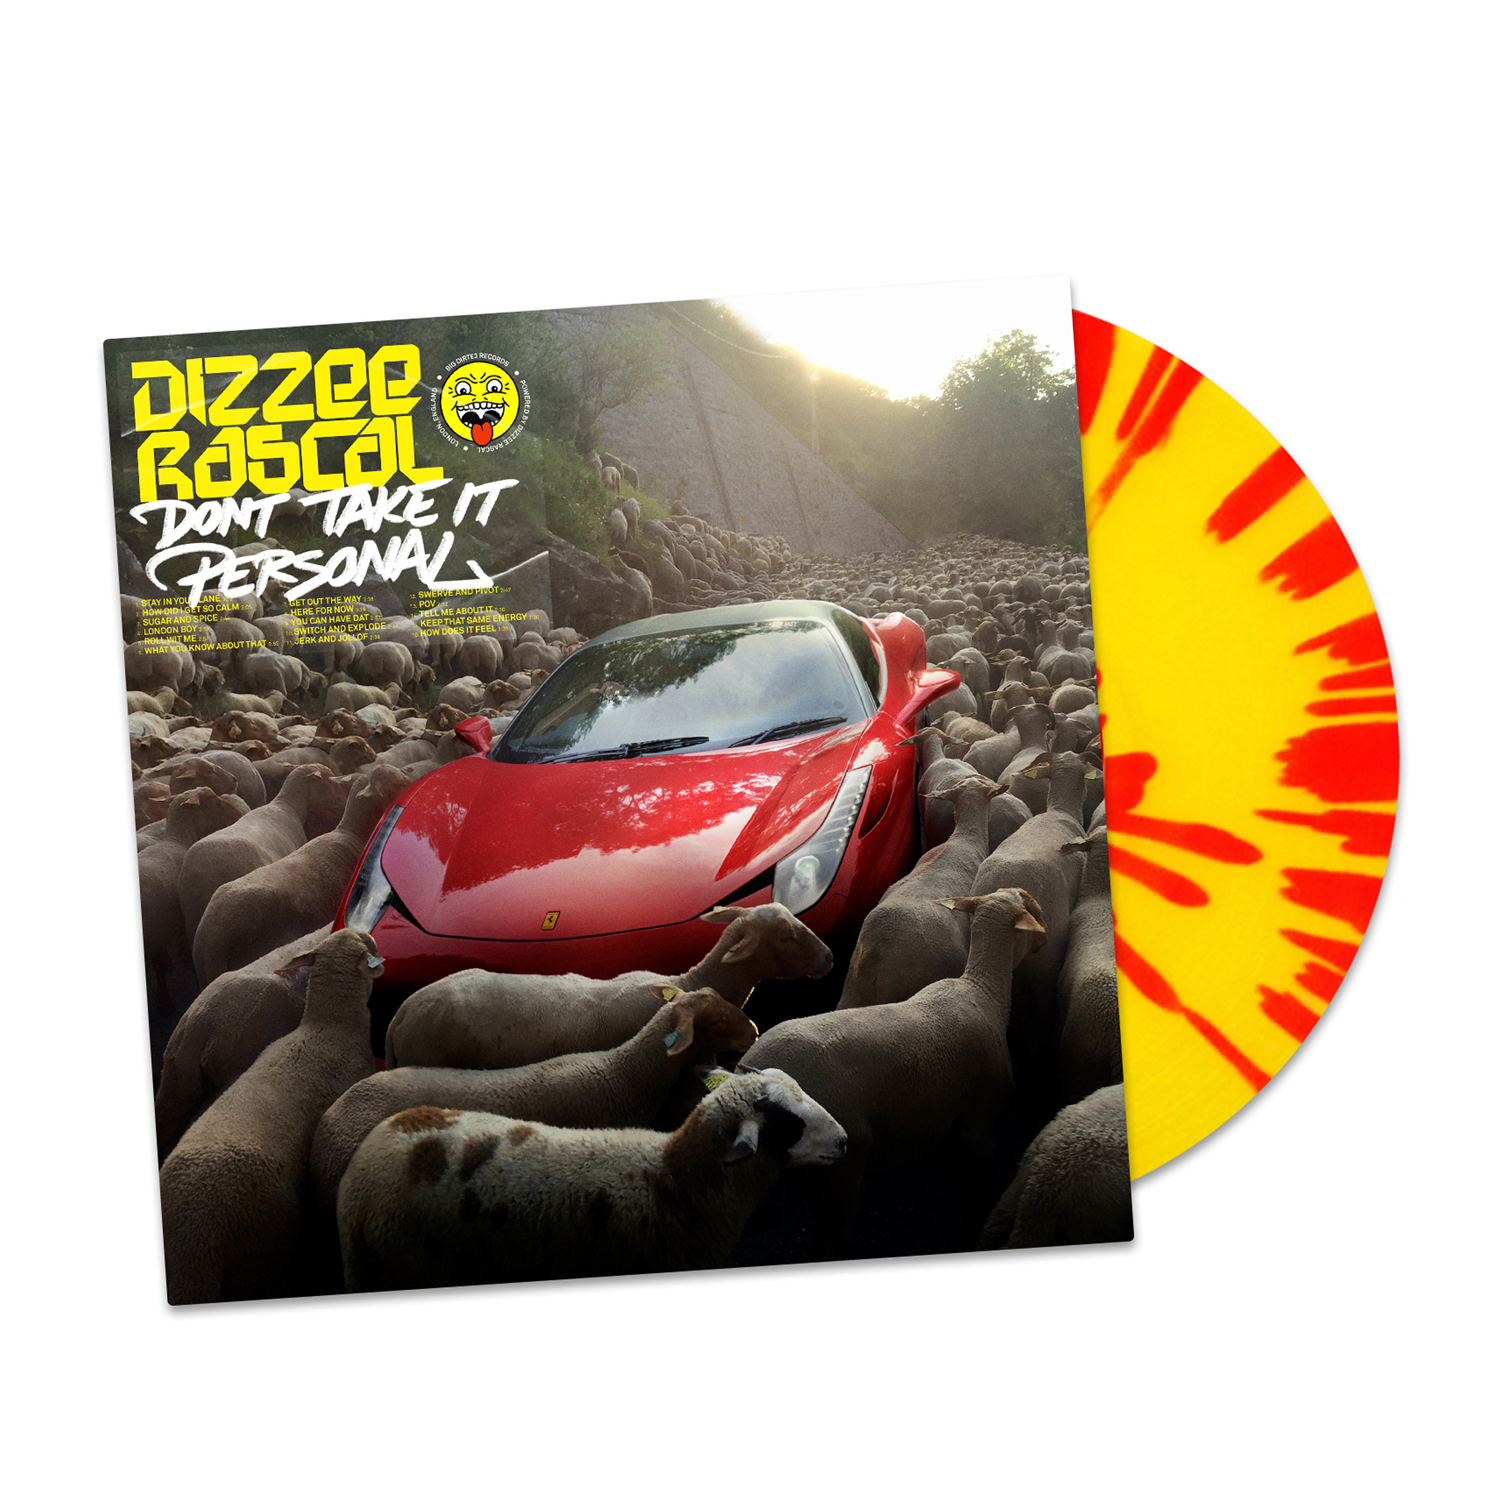 Don't Take It Personal: Limited Red/Yellow Splatter Vinyl LP & Signed Print [100 Available]